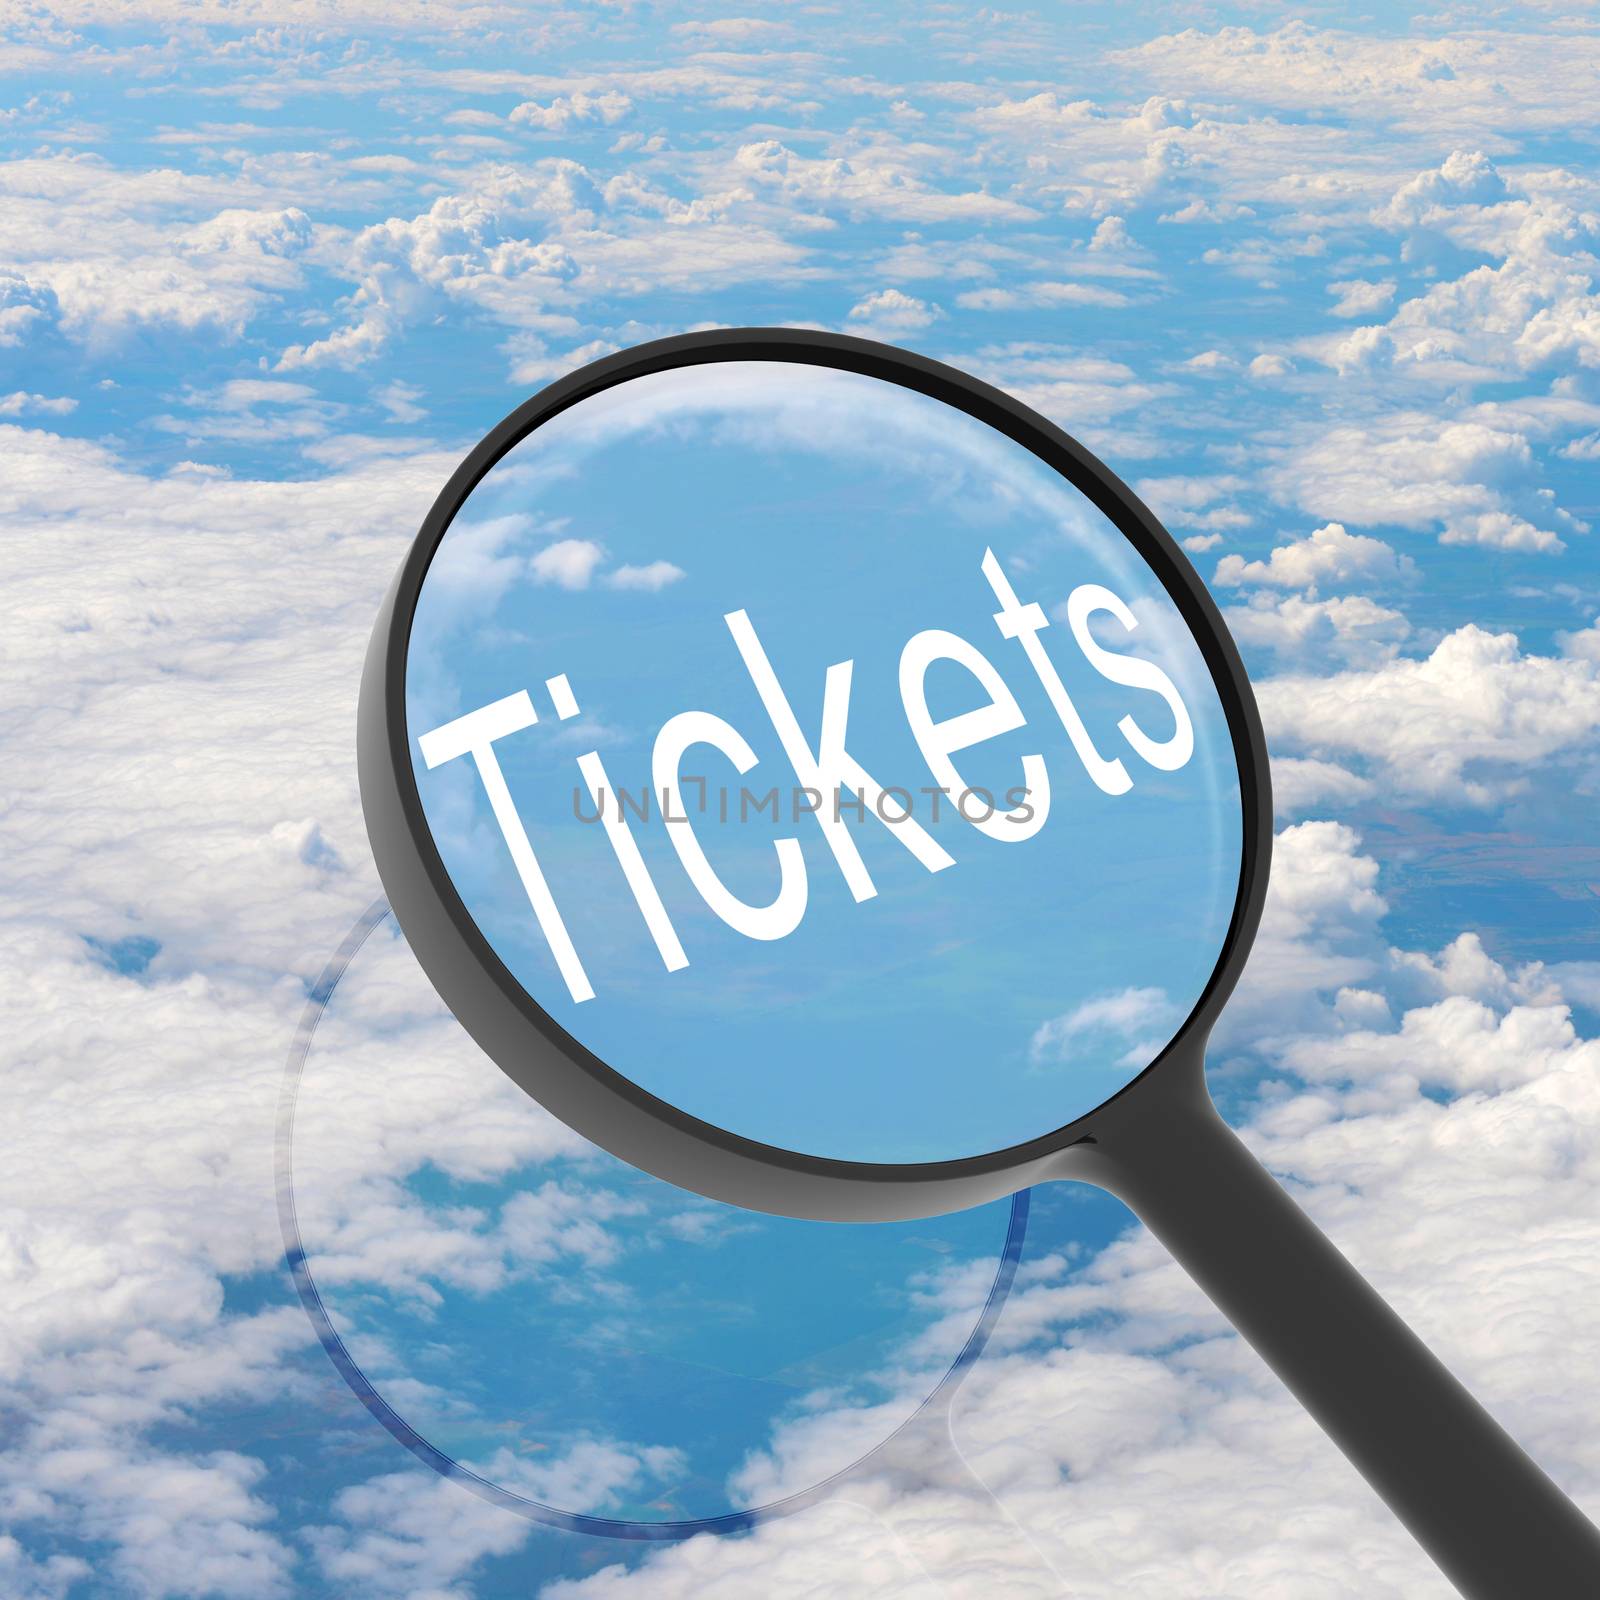 Magnifying glass looking Tickets. Clouds on background. Business concept